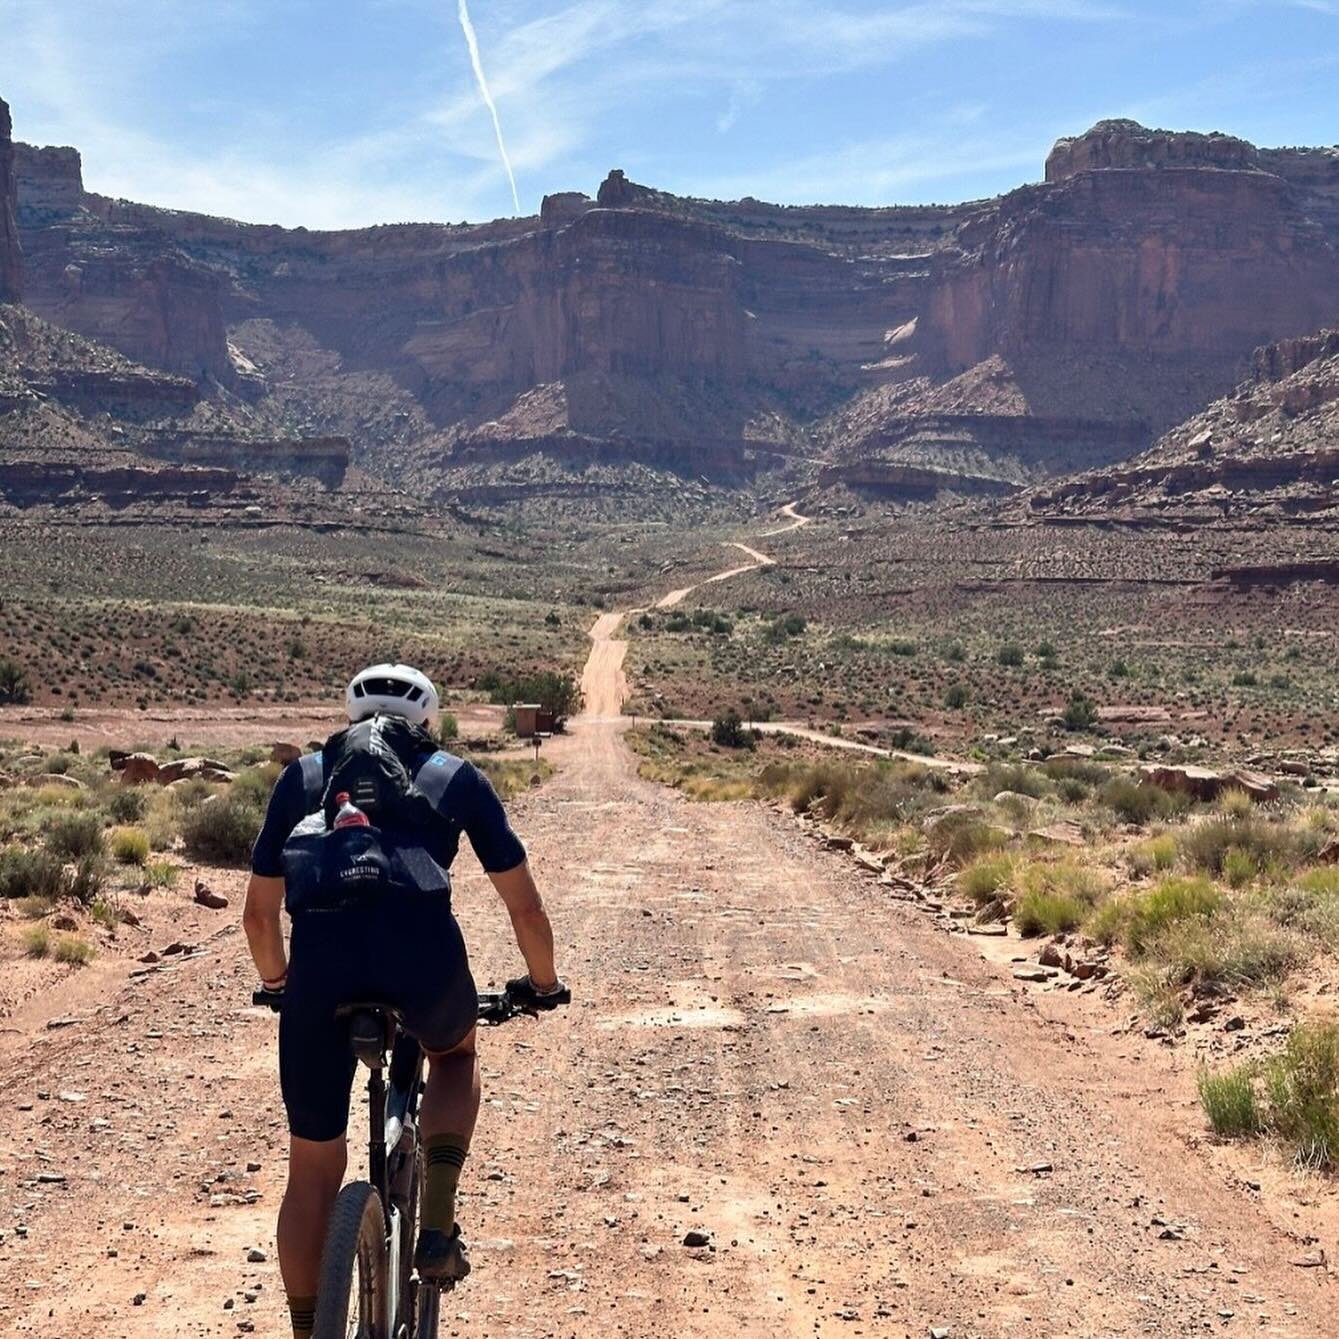 While the weather in Park City continues to bounce between seasons, it looks like half the club headed south for some fab rides in warm-sunny weather.

Club members got their early season engines fired up at Moab Gran Fondo and CO2UT Gravel. Congrats